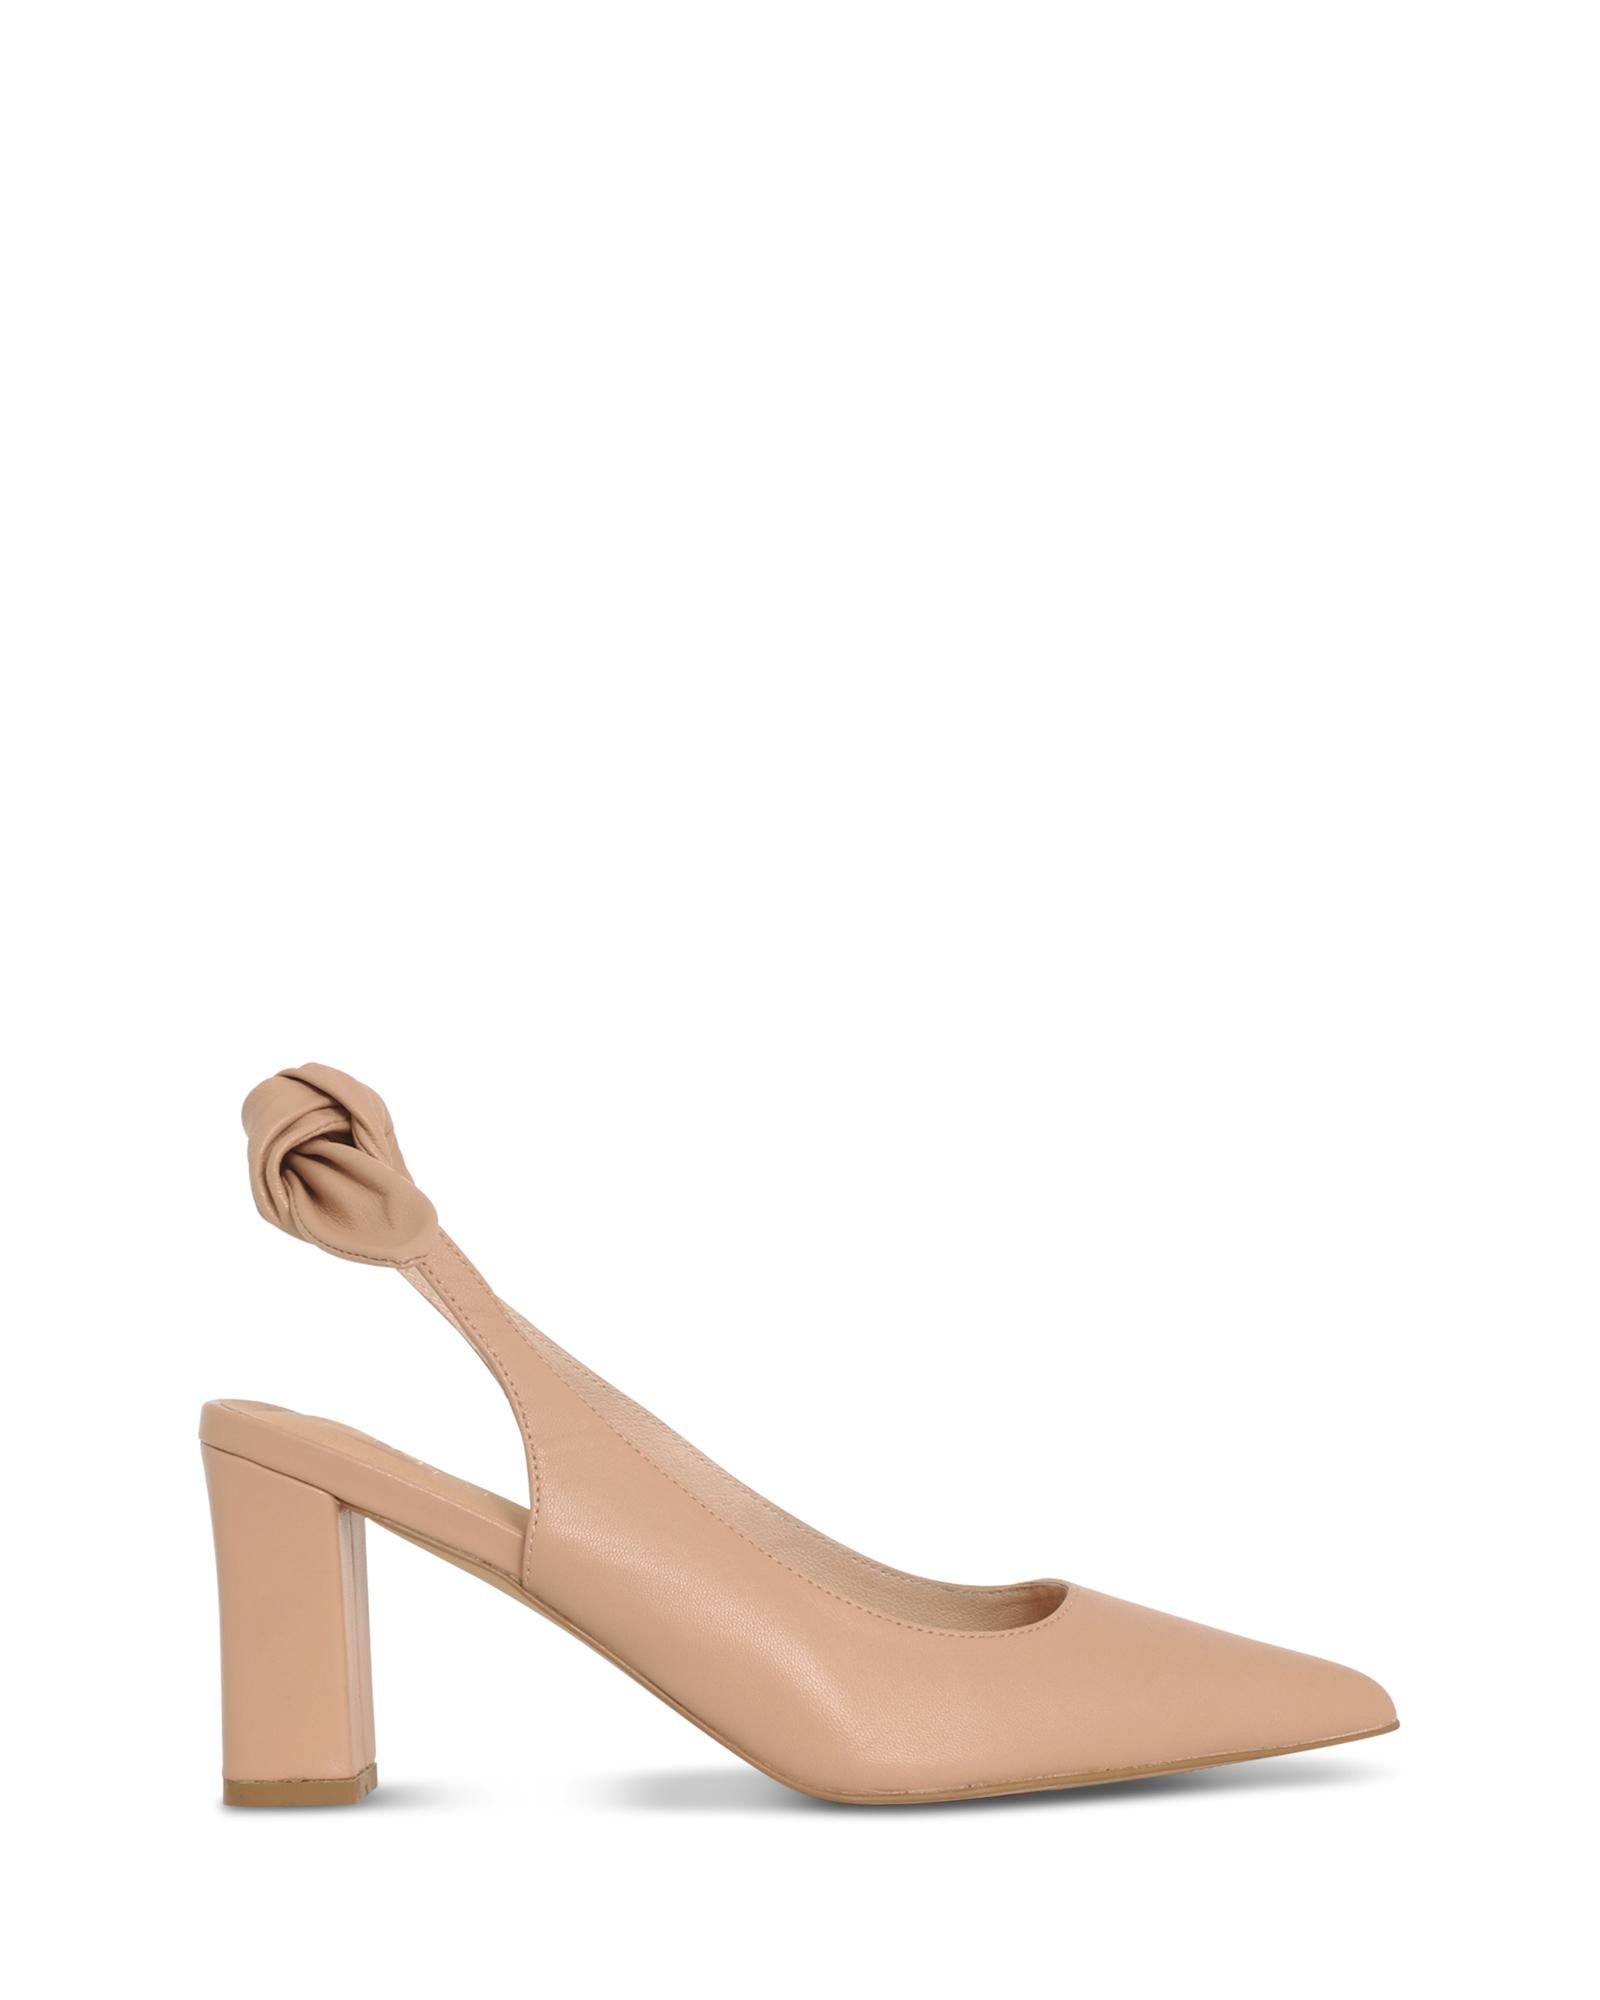 Piper Nude 8cm Heel Slingback Pump with Point Toe